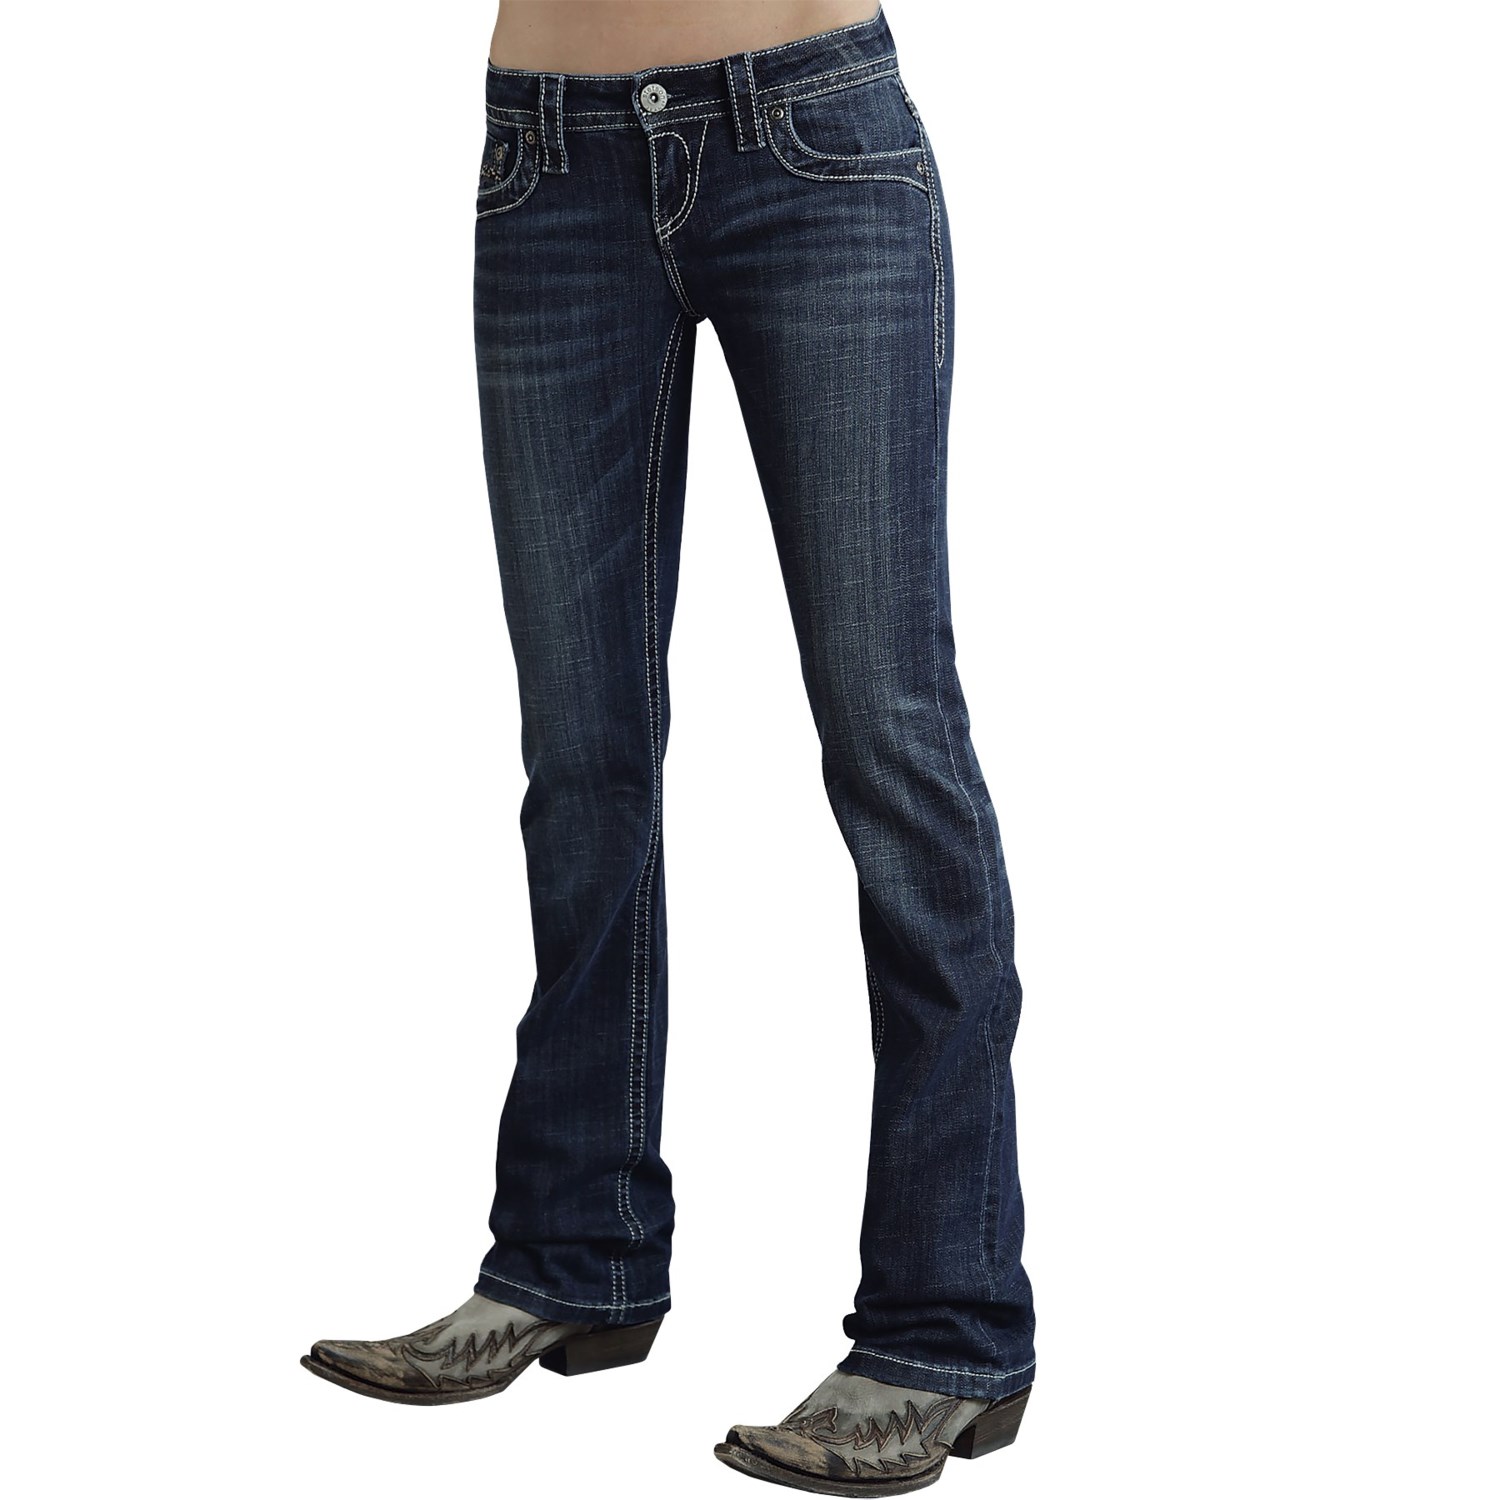 Stetson Contemporary Flap-Pocket Jeans (For Women) - Save 81%